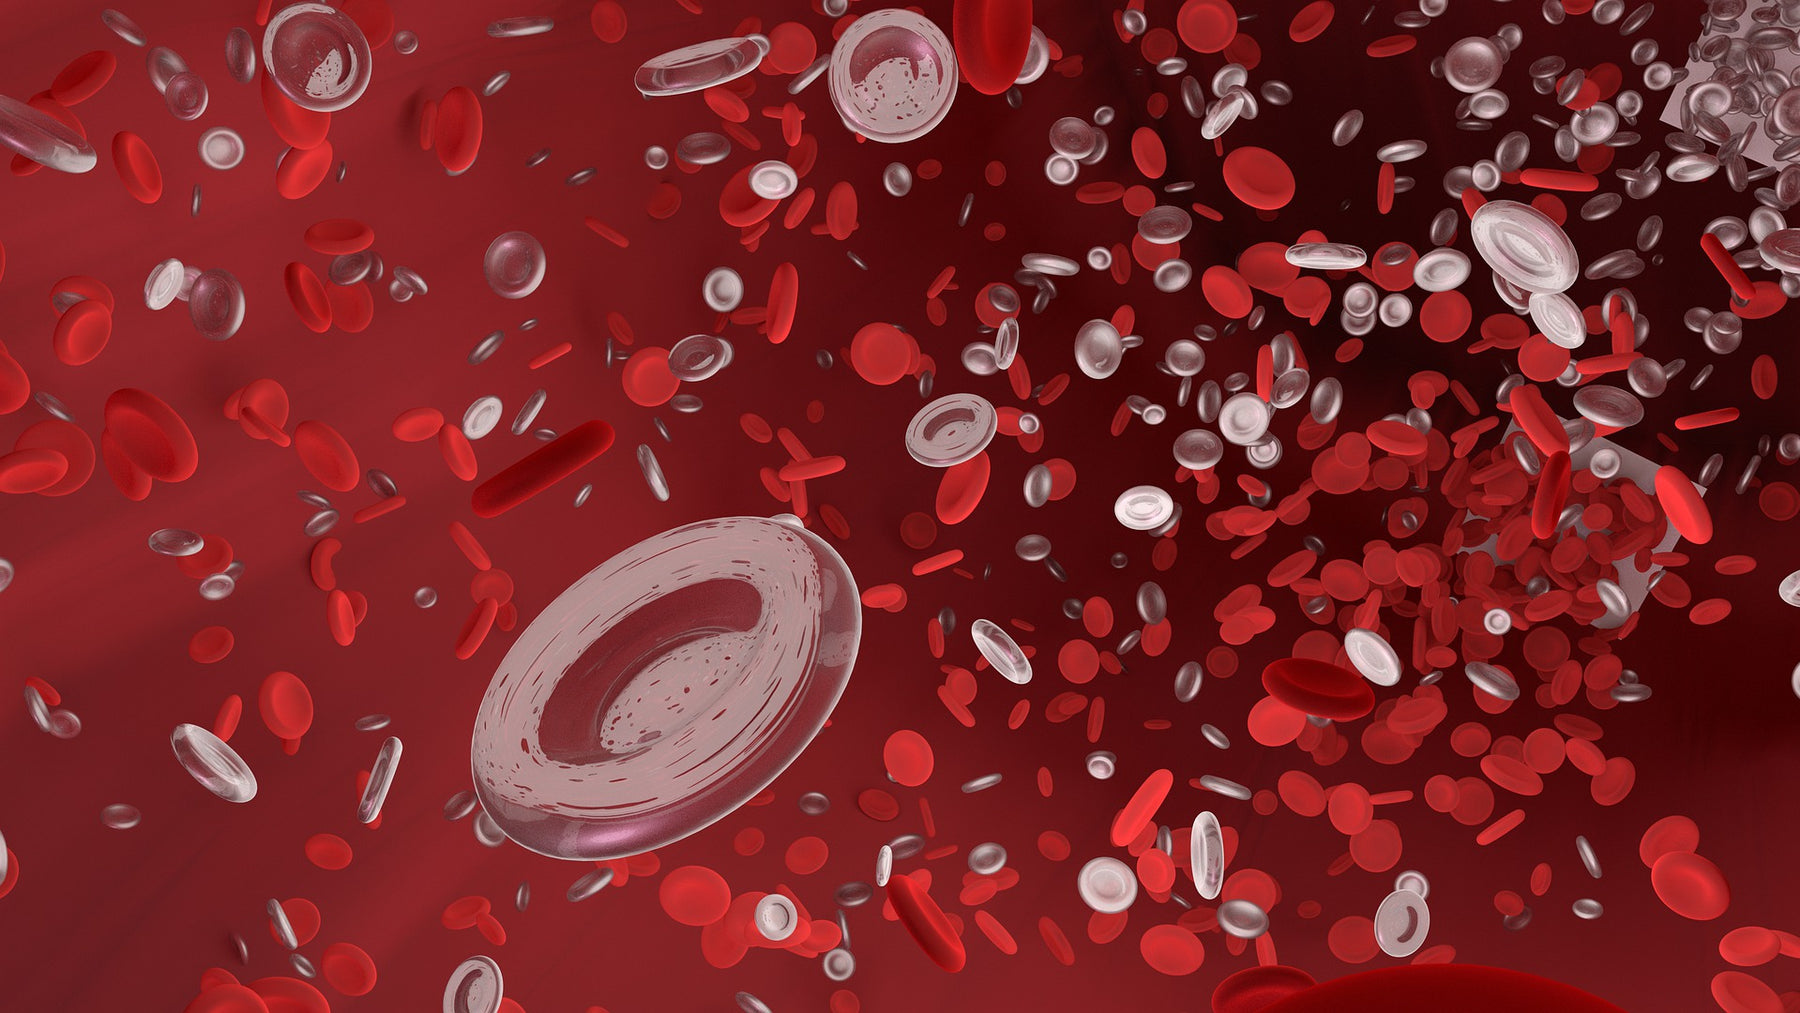 Red blood cells travelling